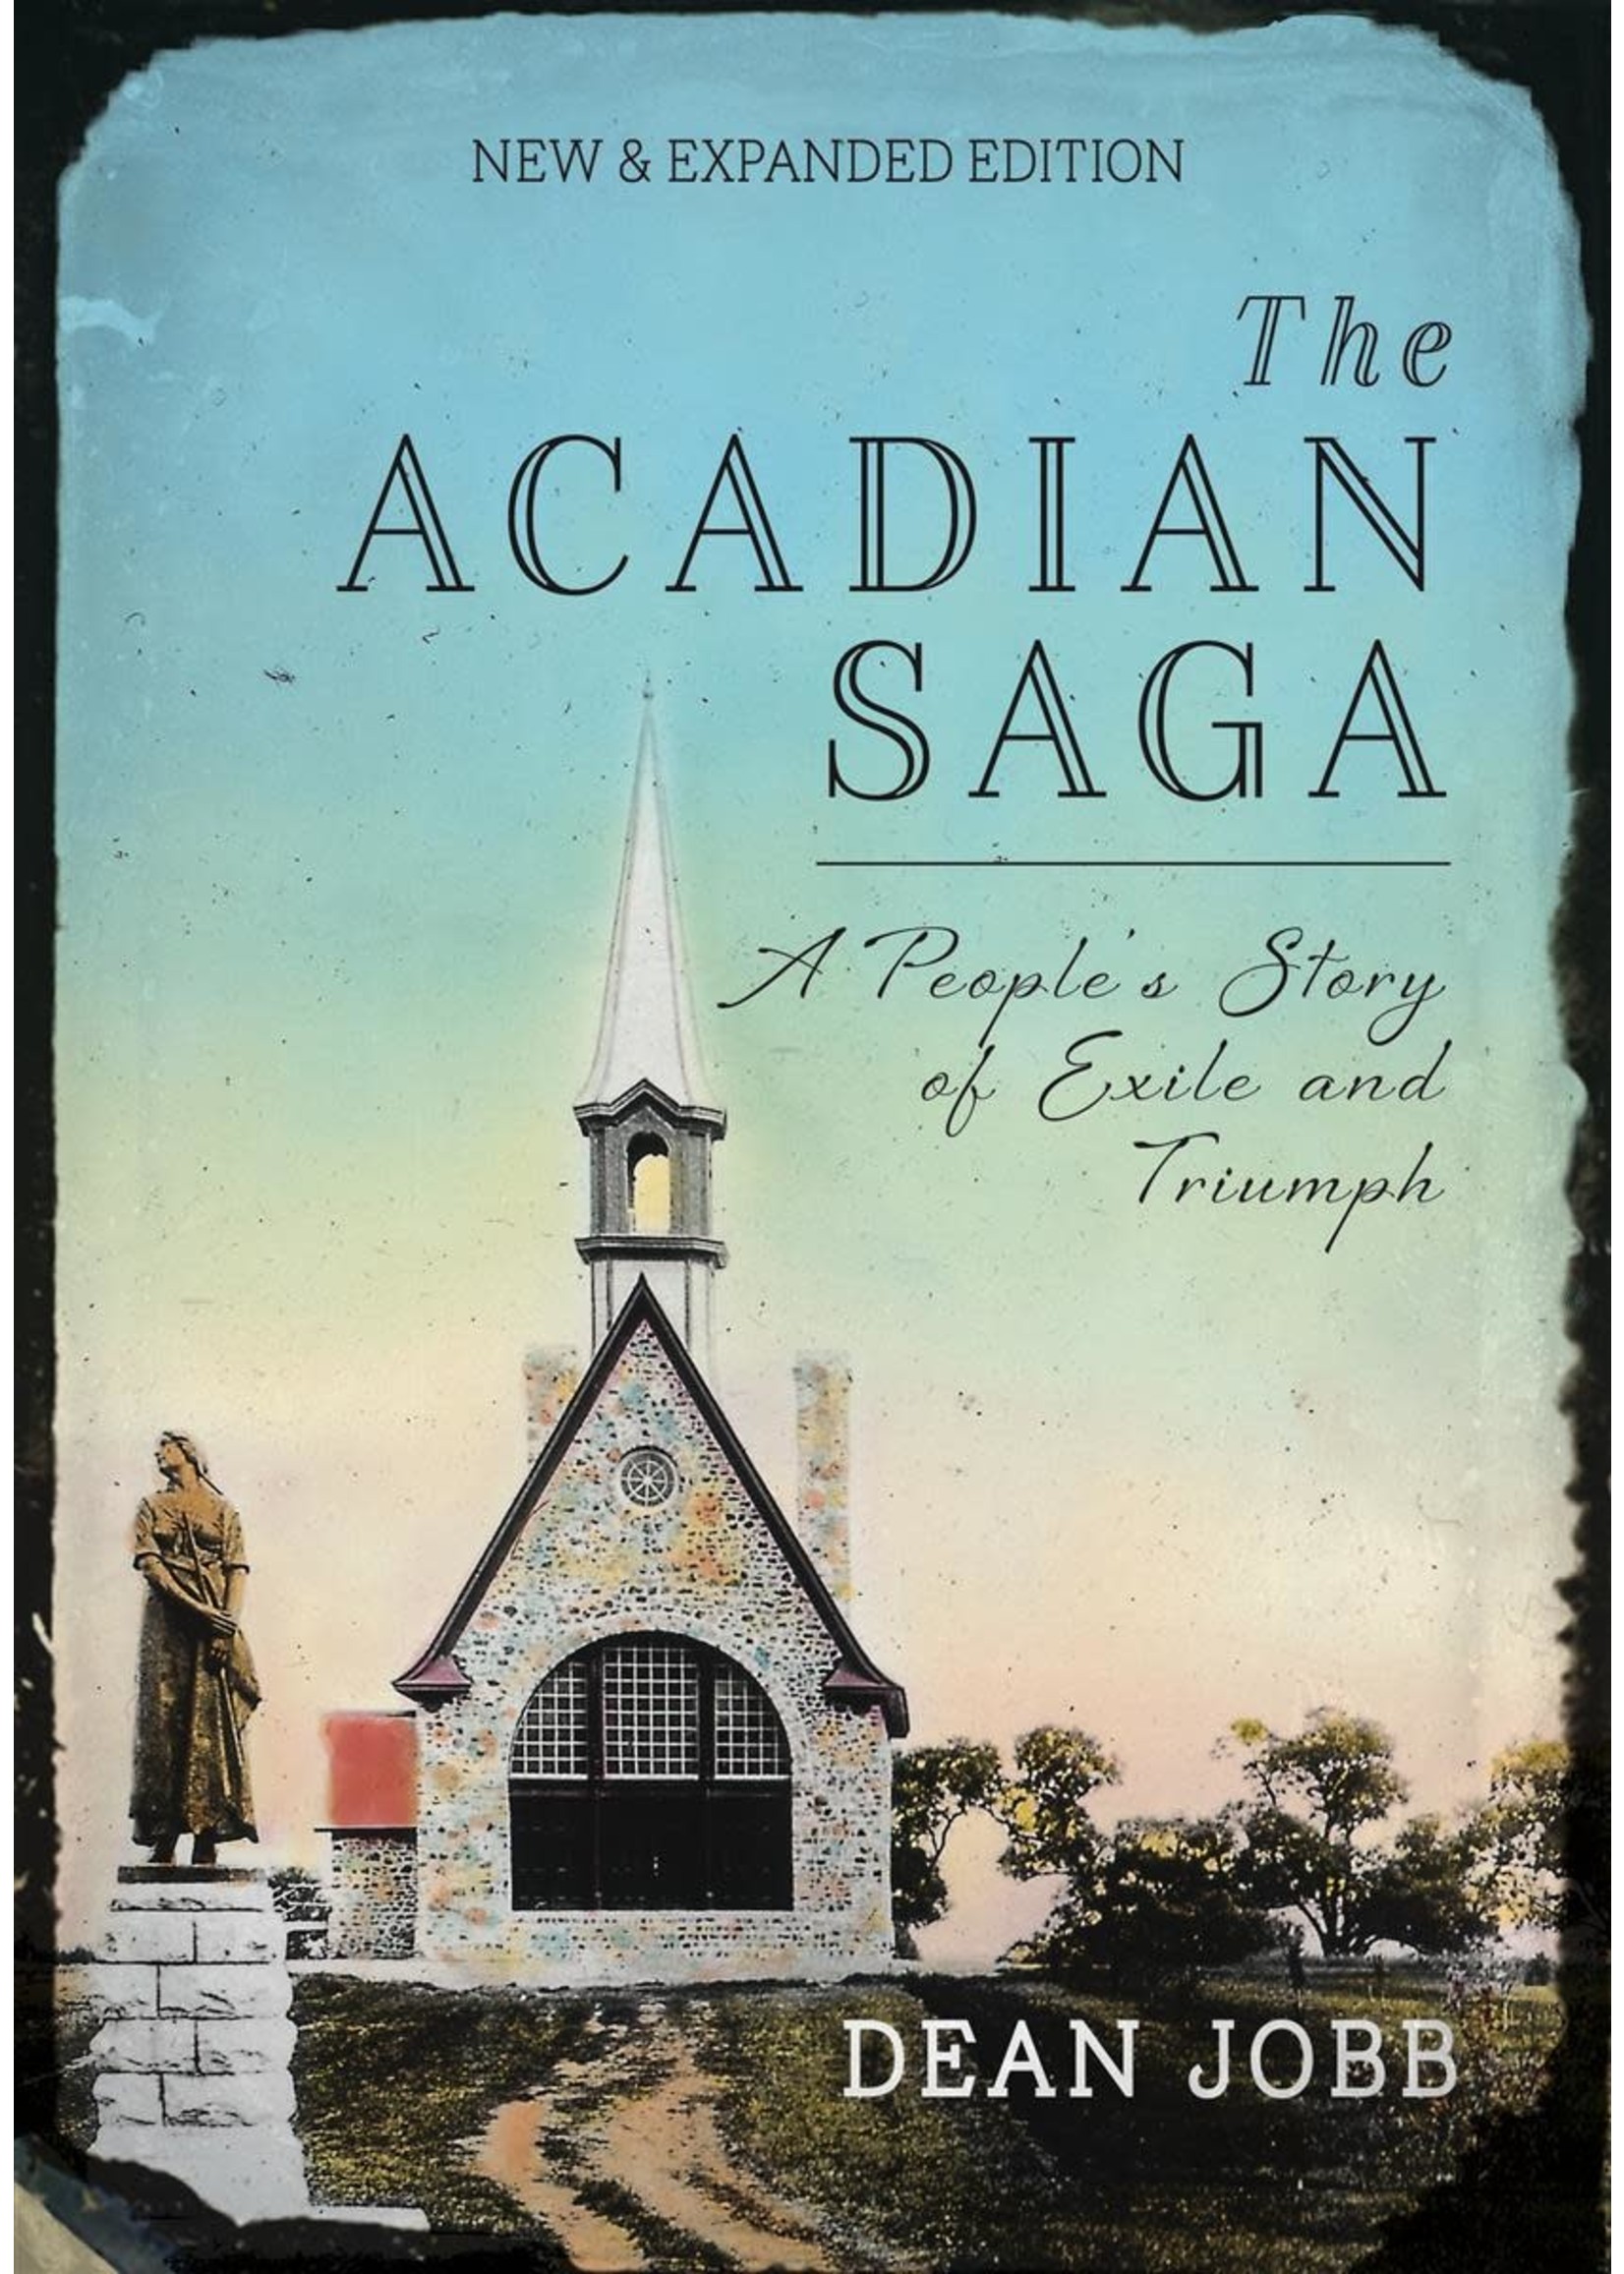 The Acadian Saga: A People's Story of Exile and Triumph (New & Expanded Edition, 2 ed) by Dean Jobb